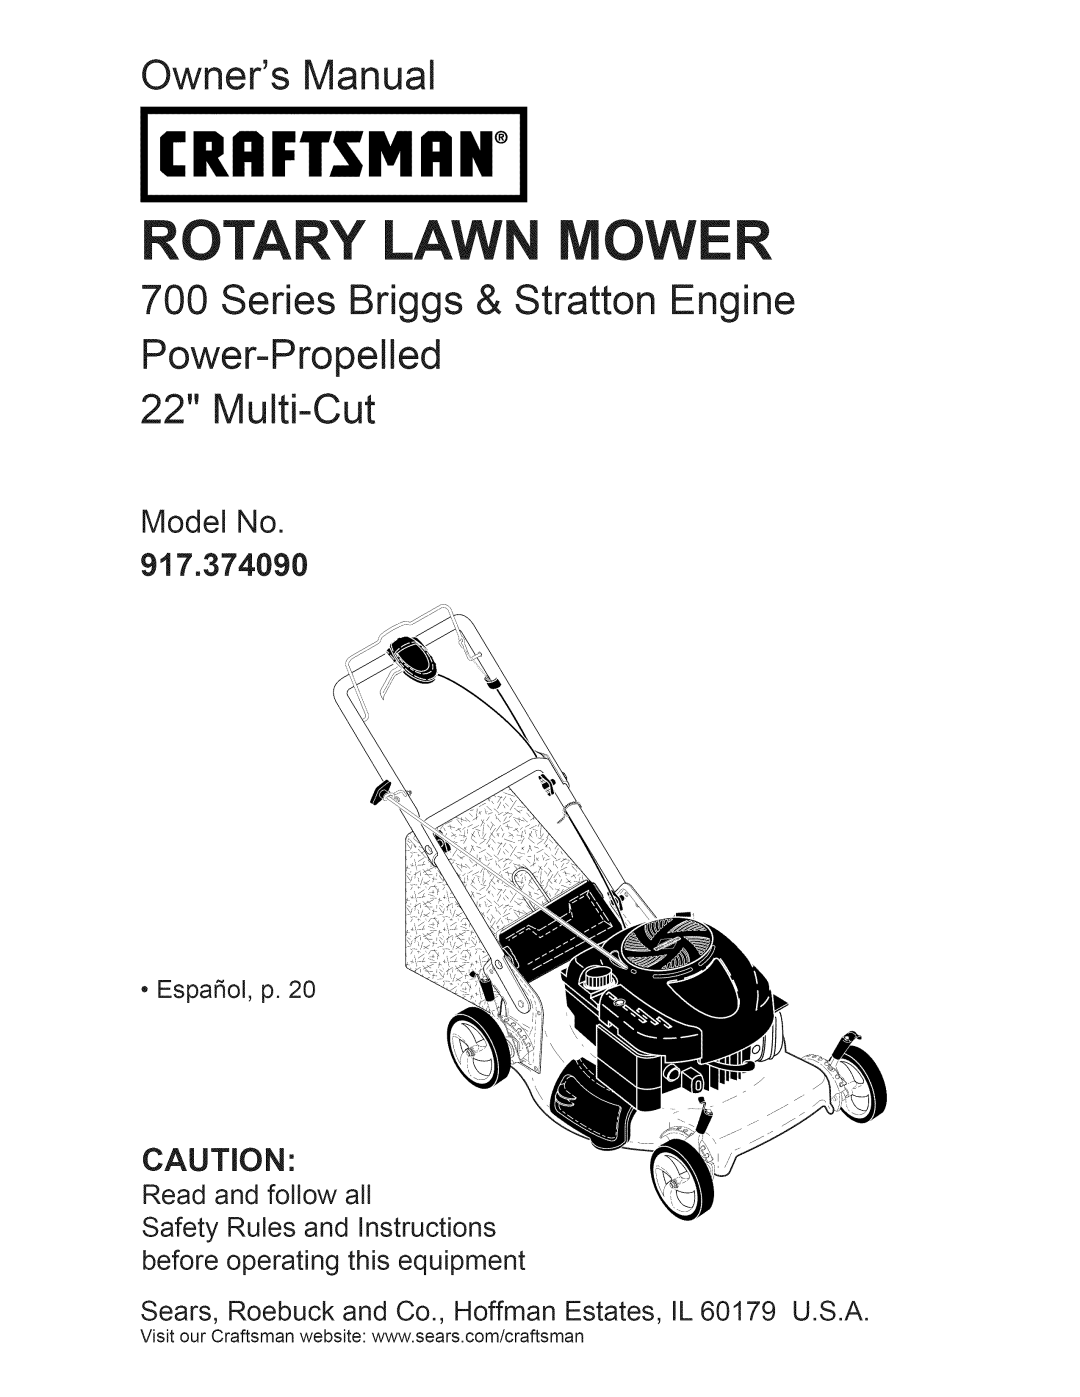 Craftsman 917.374090 manual Model No, Craftsman, Rotary Lawn Mower, Owners Manual, Series Briggs & Stratton Engine 